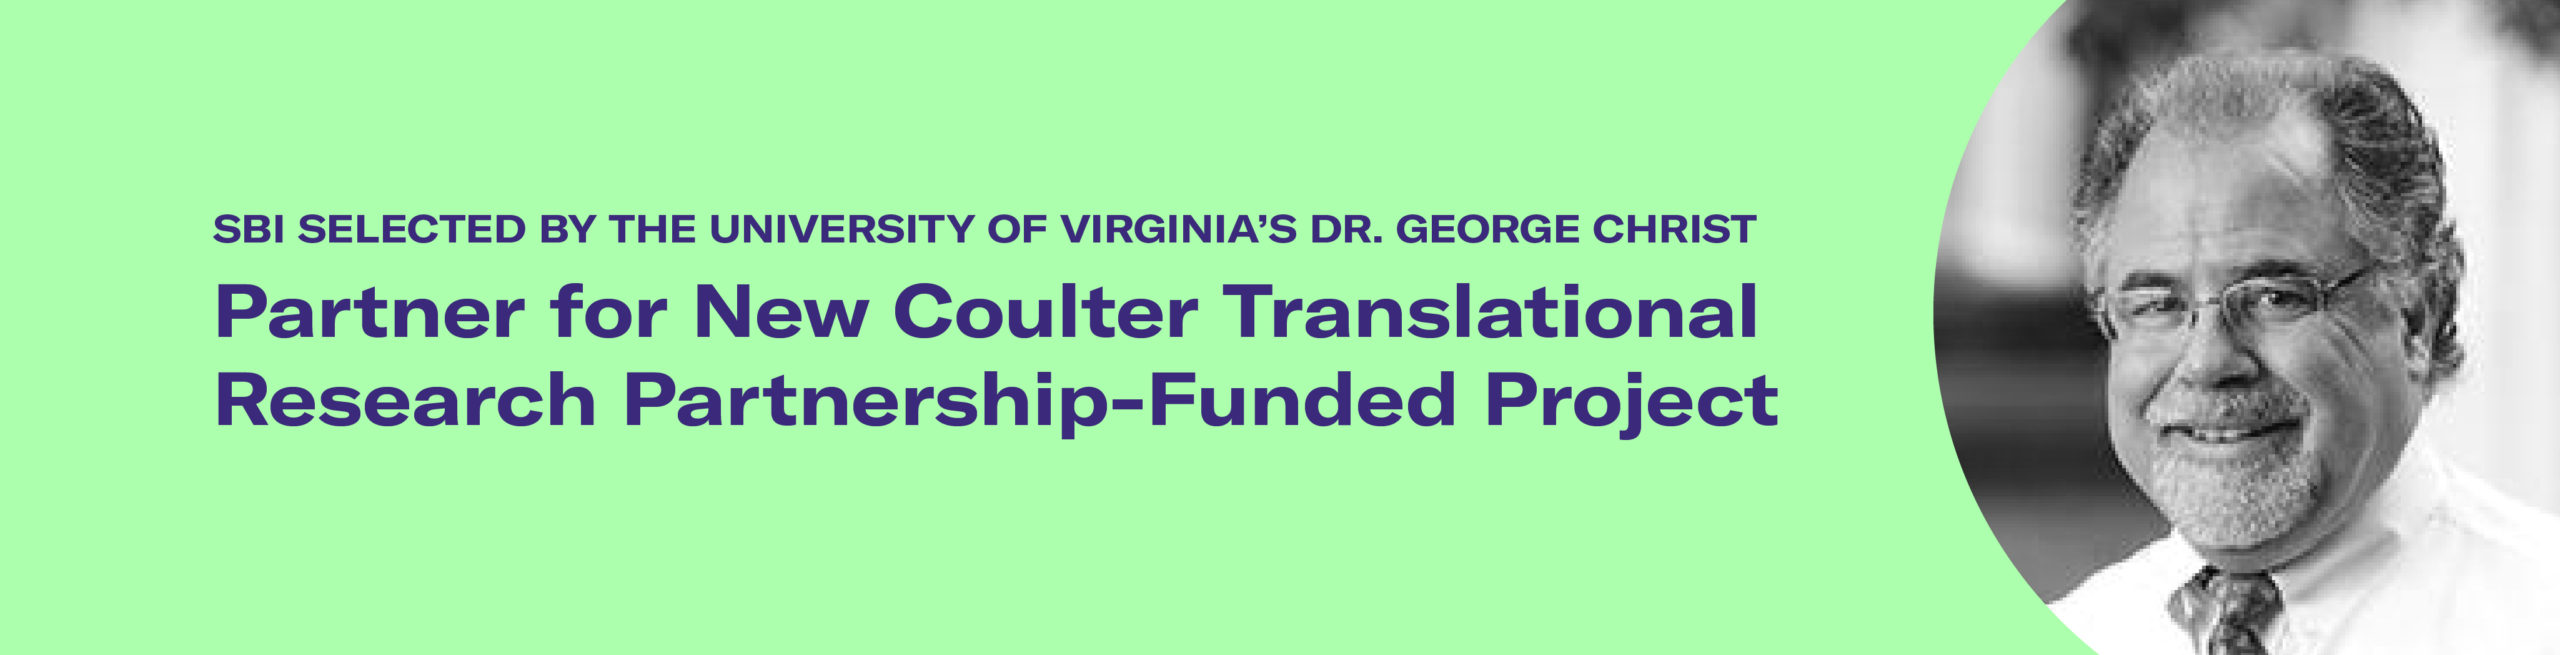 SBI Selected by the University of Virginia’s Dr. George Christ as a Partner for New Coulter Translational Research Partnership-Funded Project